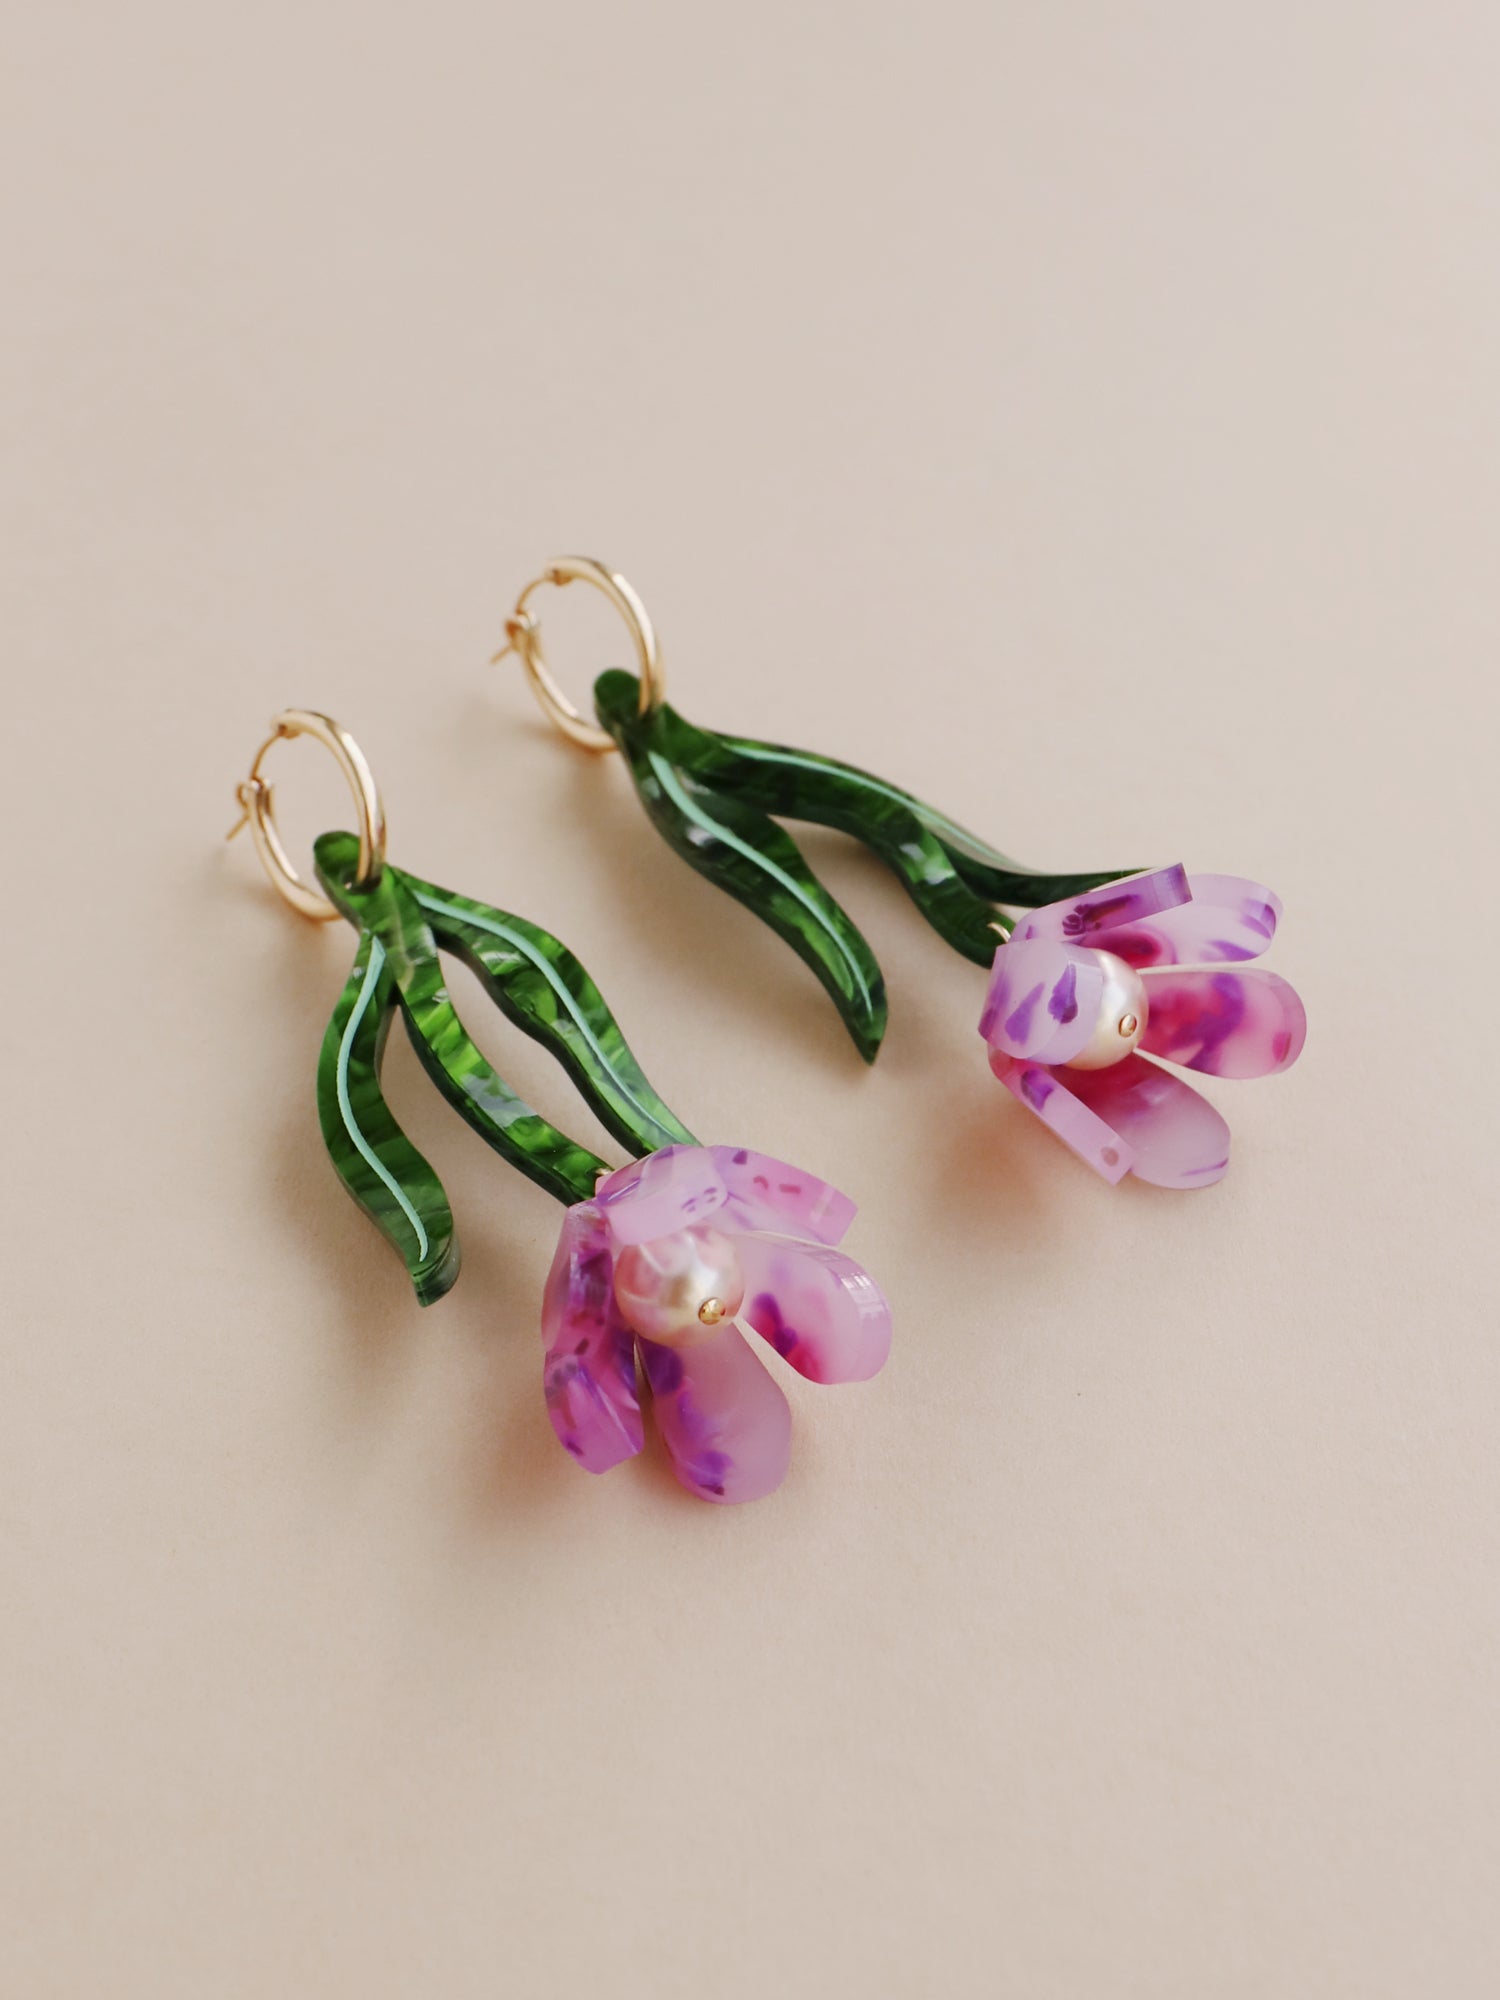 Purple & green sculptural tulip statement hoop earrings. Made from heat-formed acrylic with high quality glass pearls and 14k gold-filled findings. Handmade in the UK by Wolf & Moon.